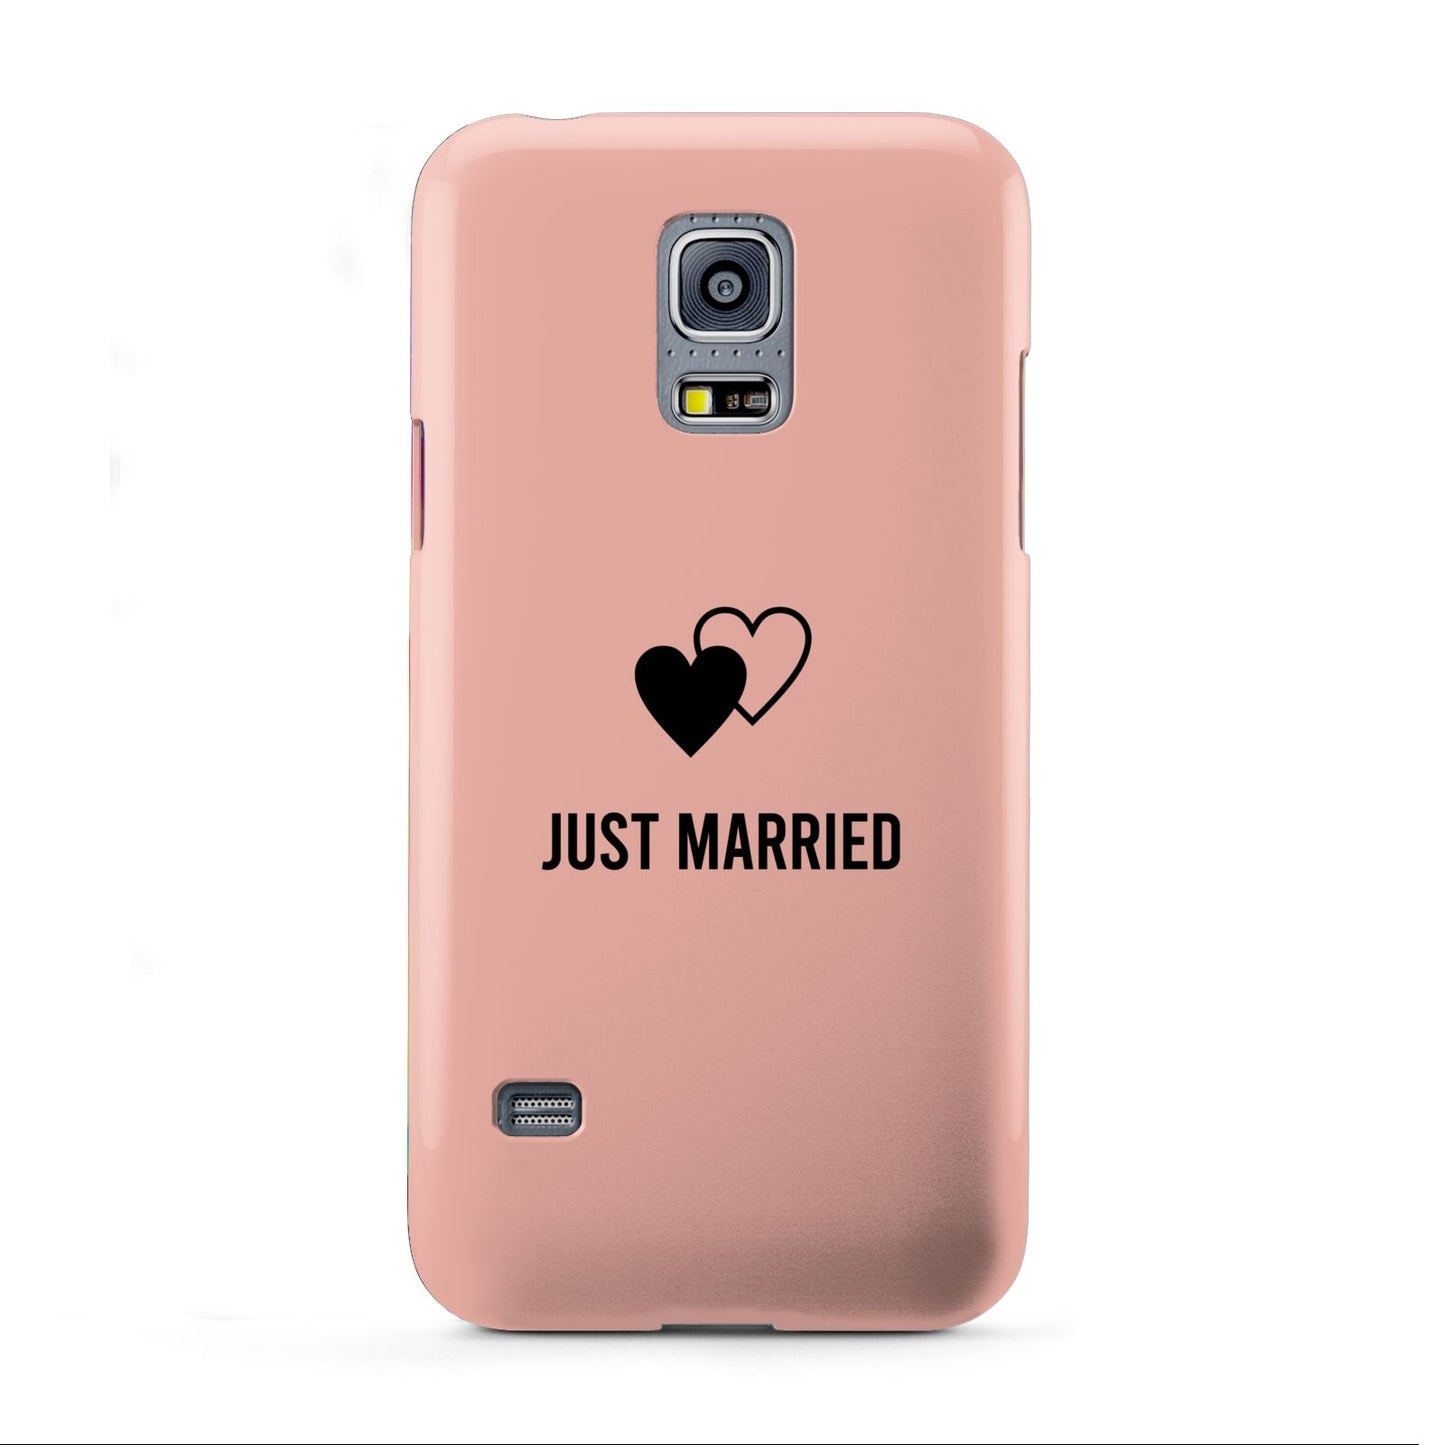 Just Married Samsung Galaxy S5 Mini Case